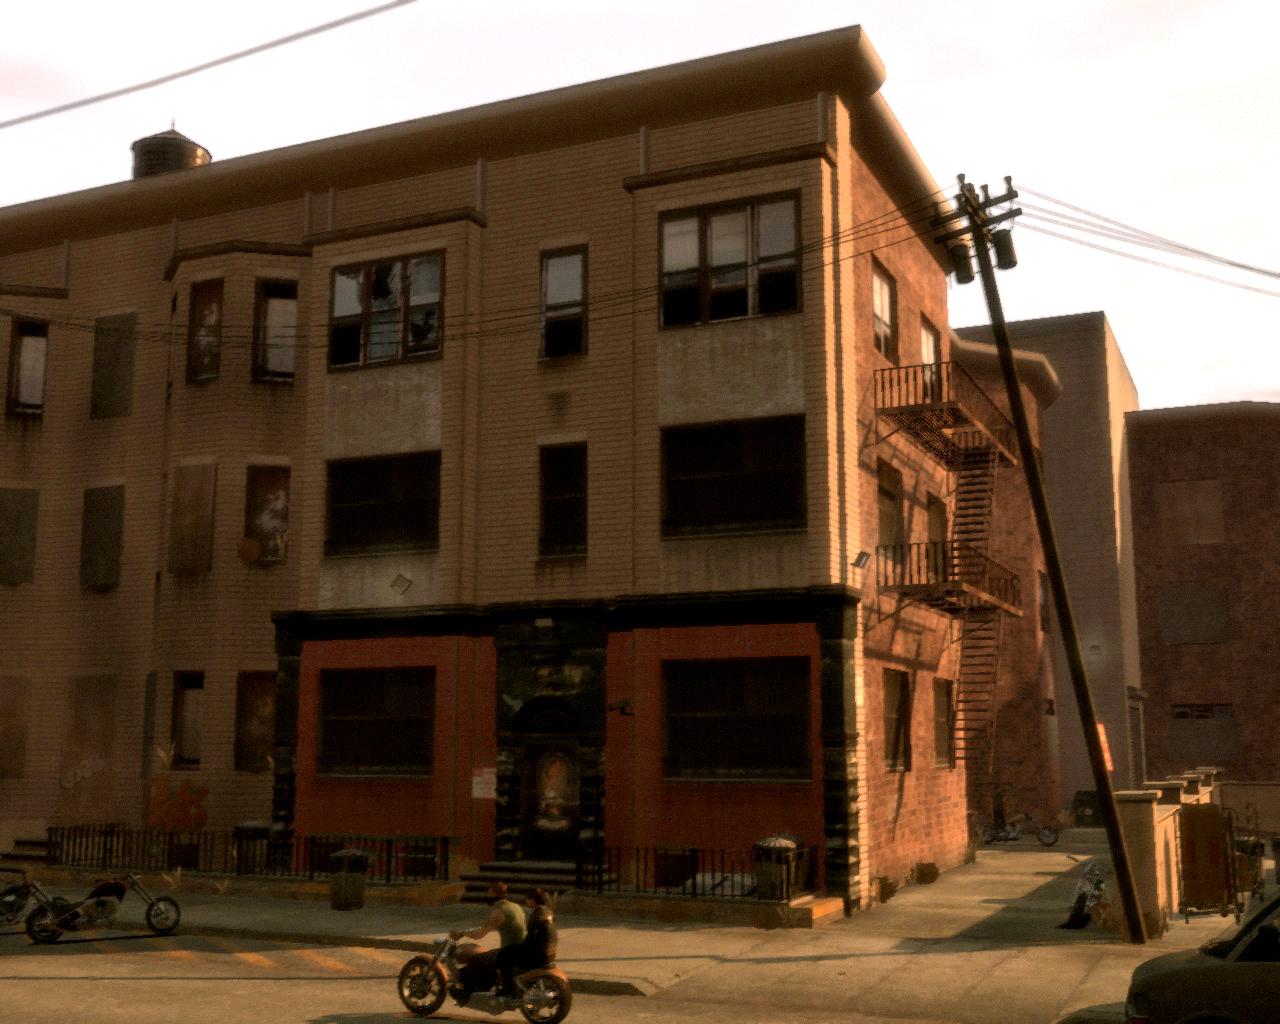 Safe house in gta 5 фото 34